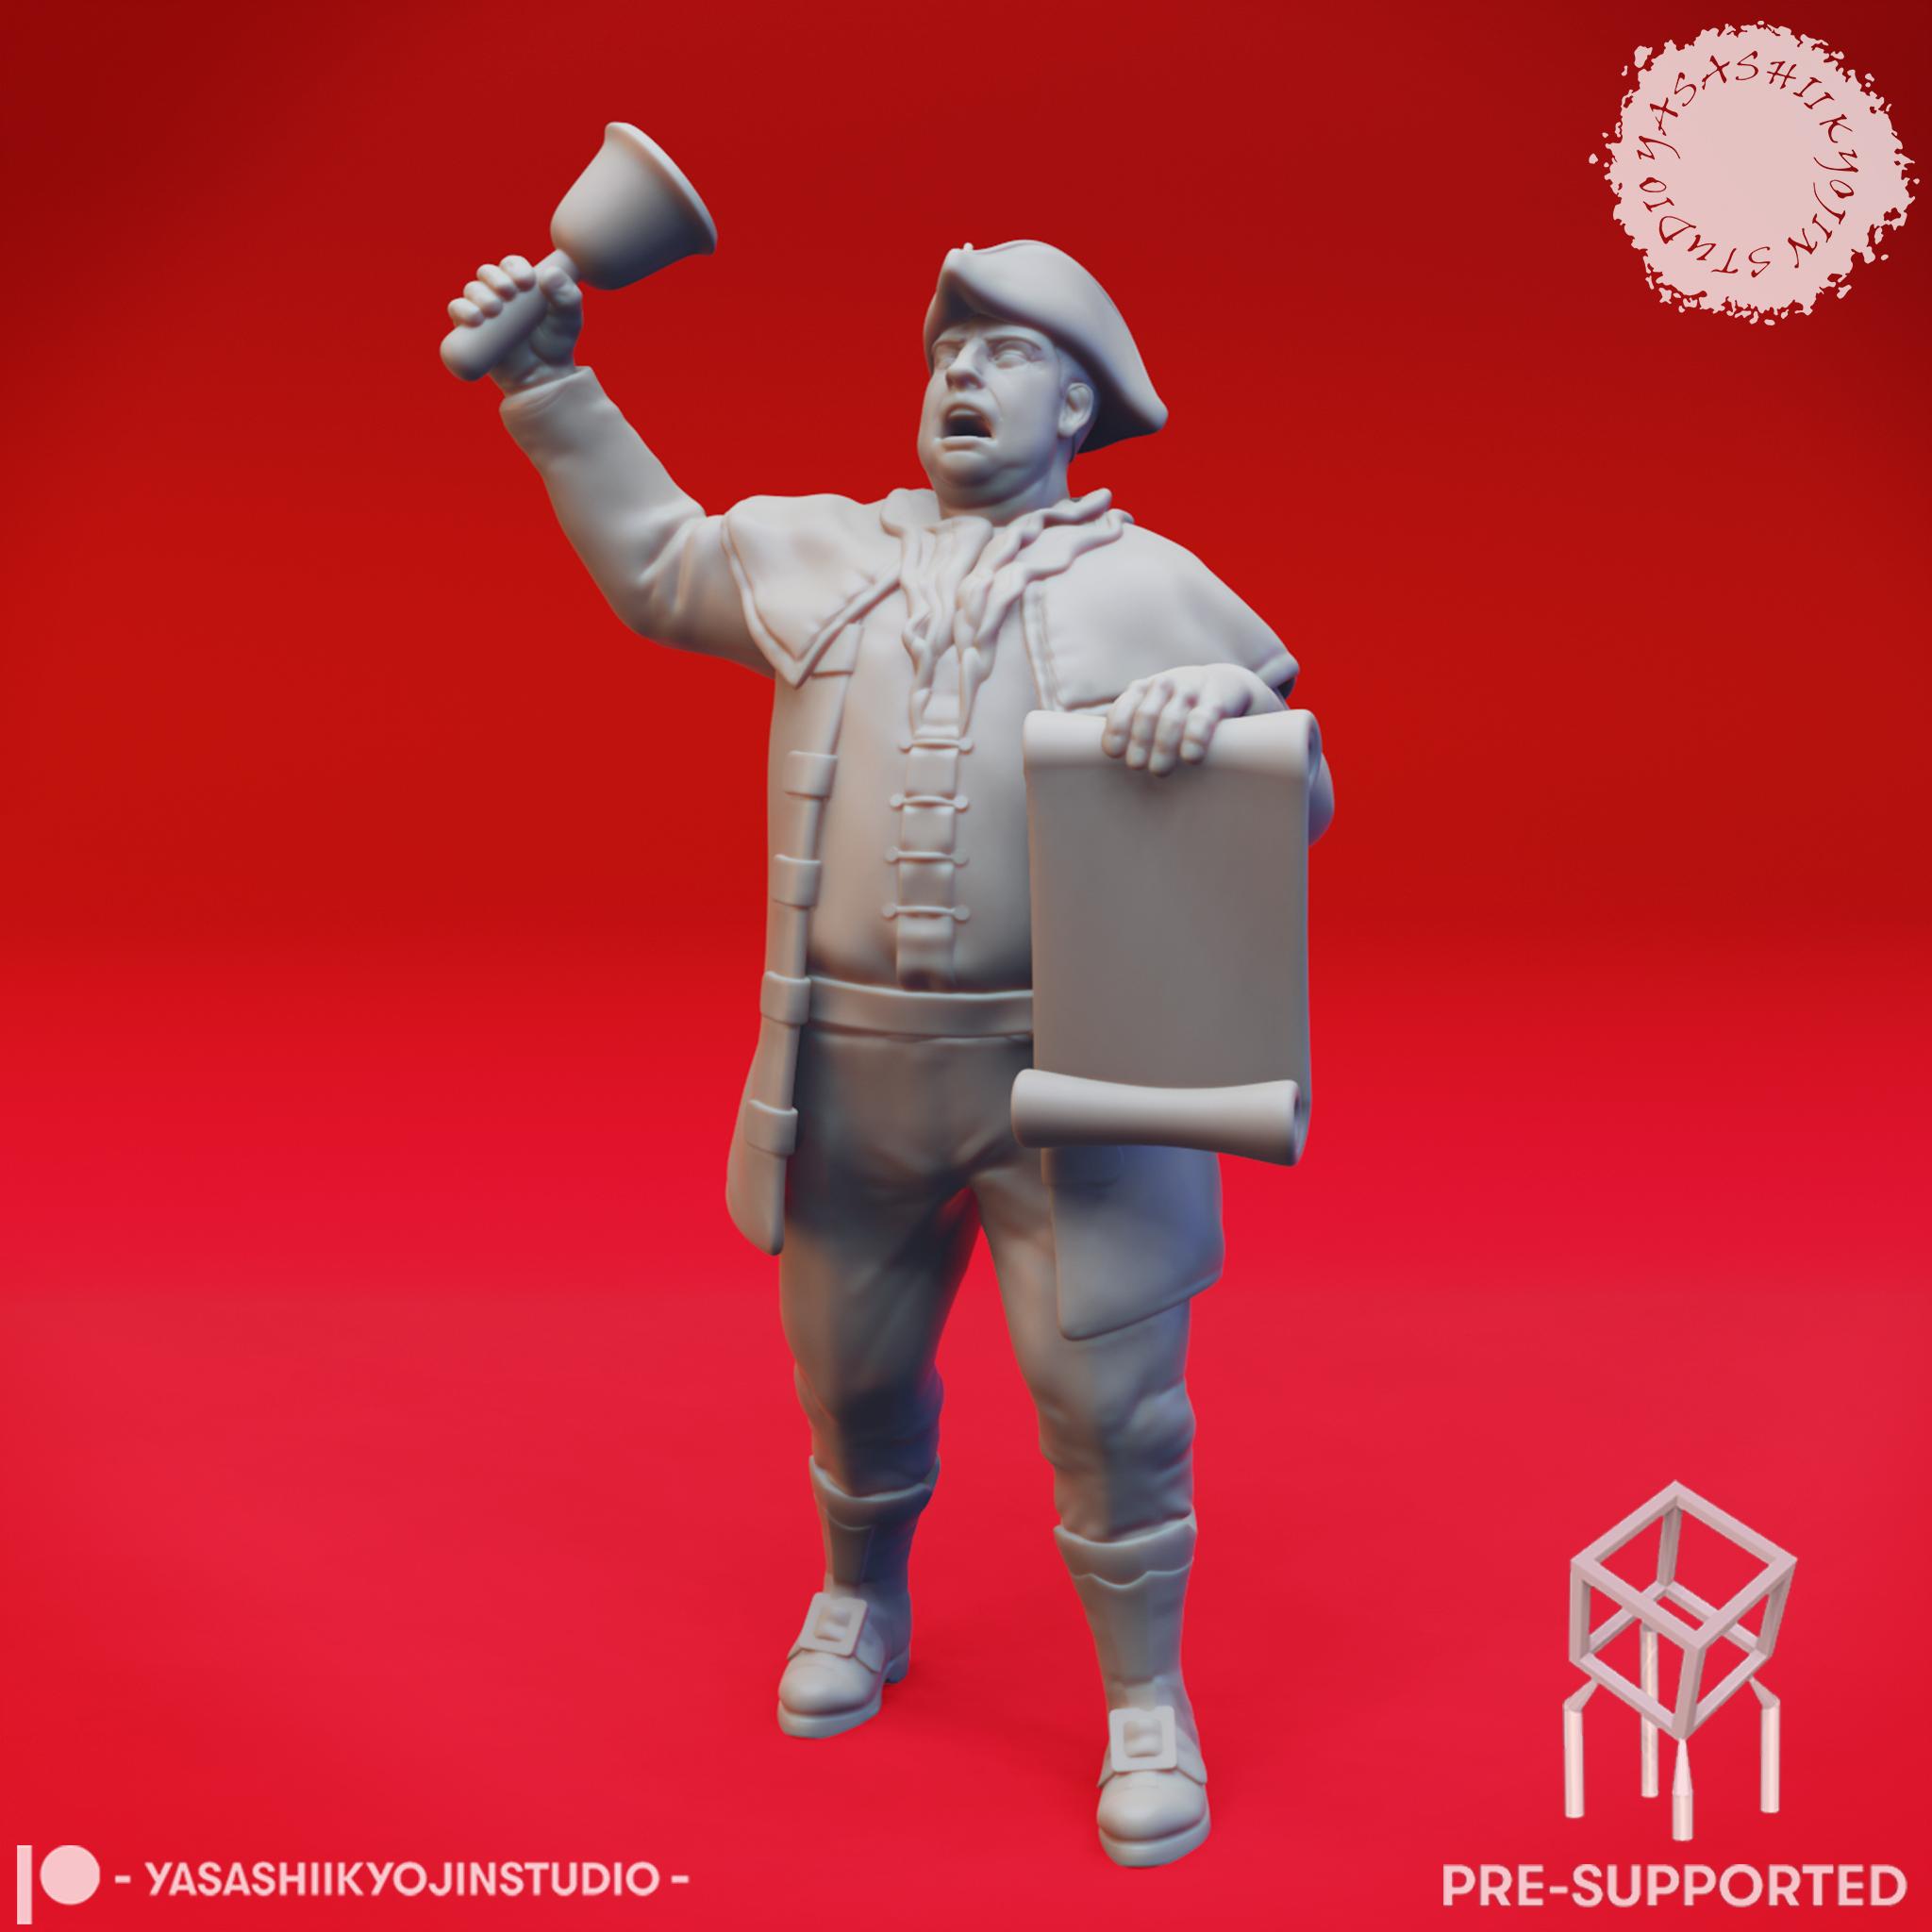 Townsfolk - Town Crier - Tabletop Miniatures (Pre-Supported) 3d model